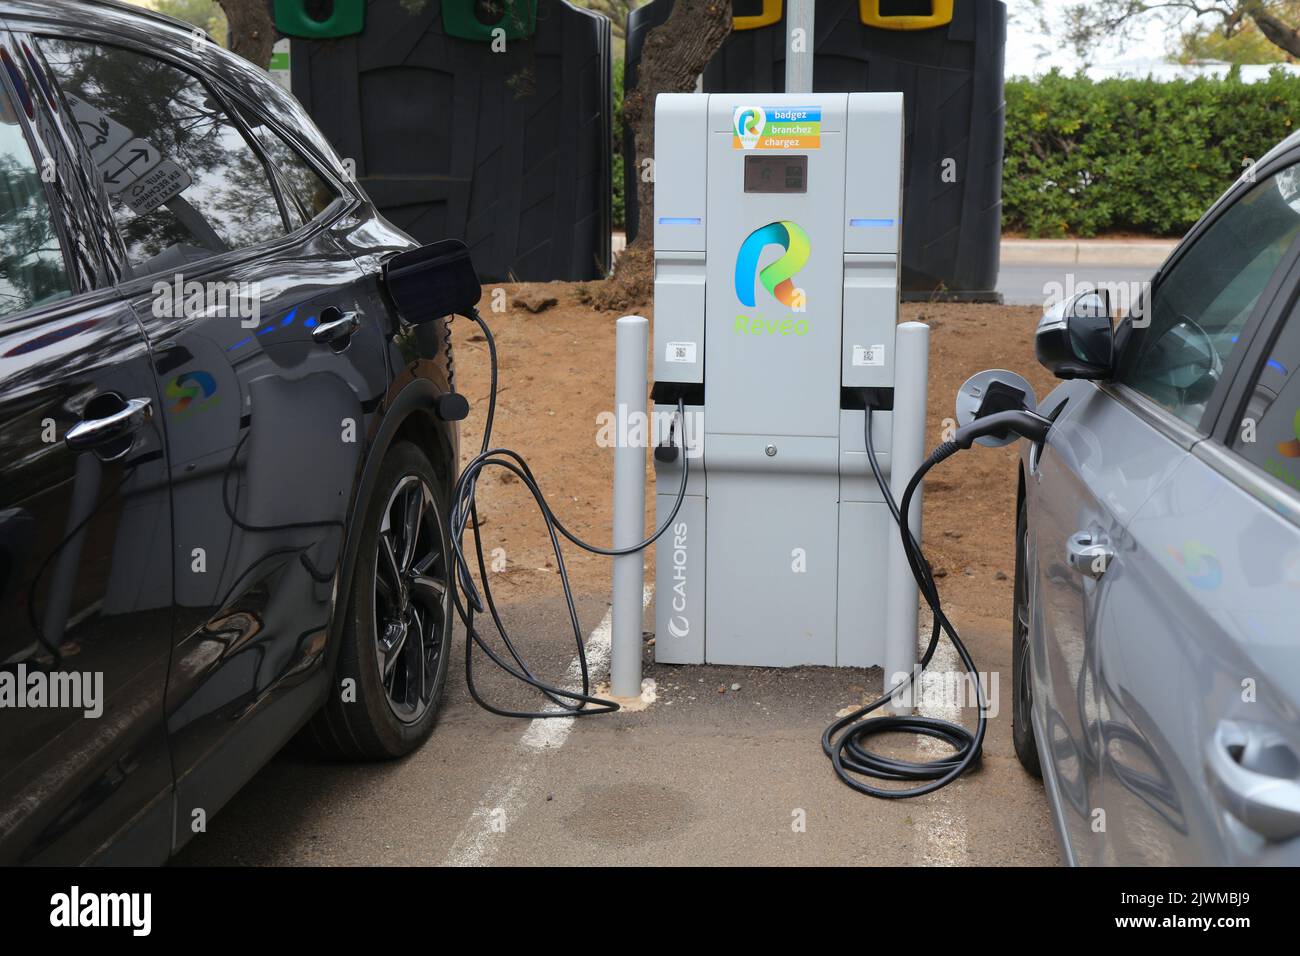 CAP D'AGDE, FRANCE - OCTOBER 2, 2021: Reveo brand electric car charging station in Cap d'Agde, France. Reveo is part of Groupe Cahors. Stock Photo